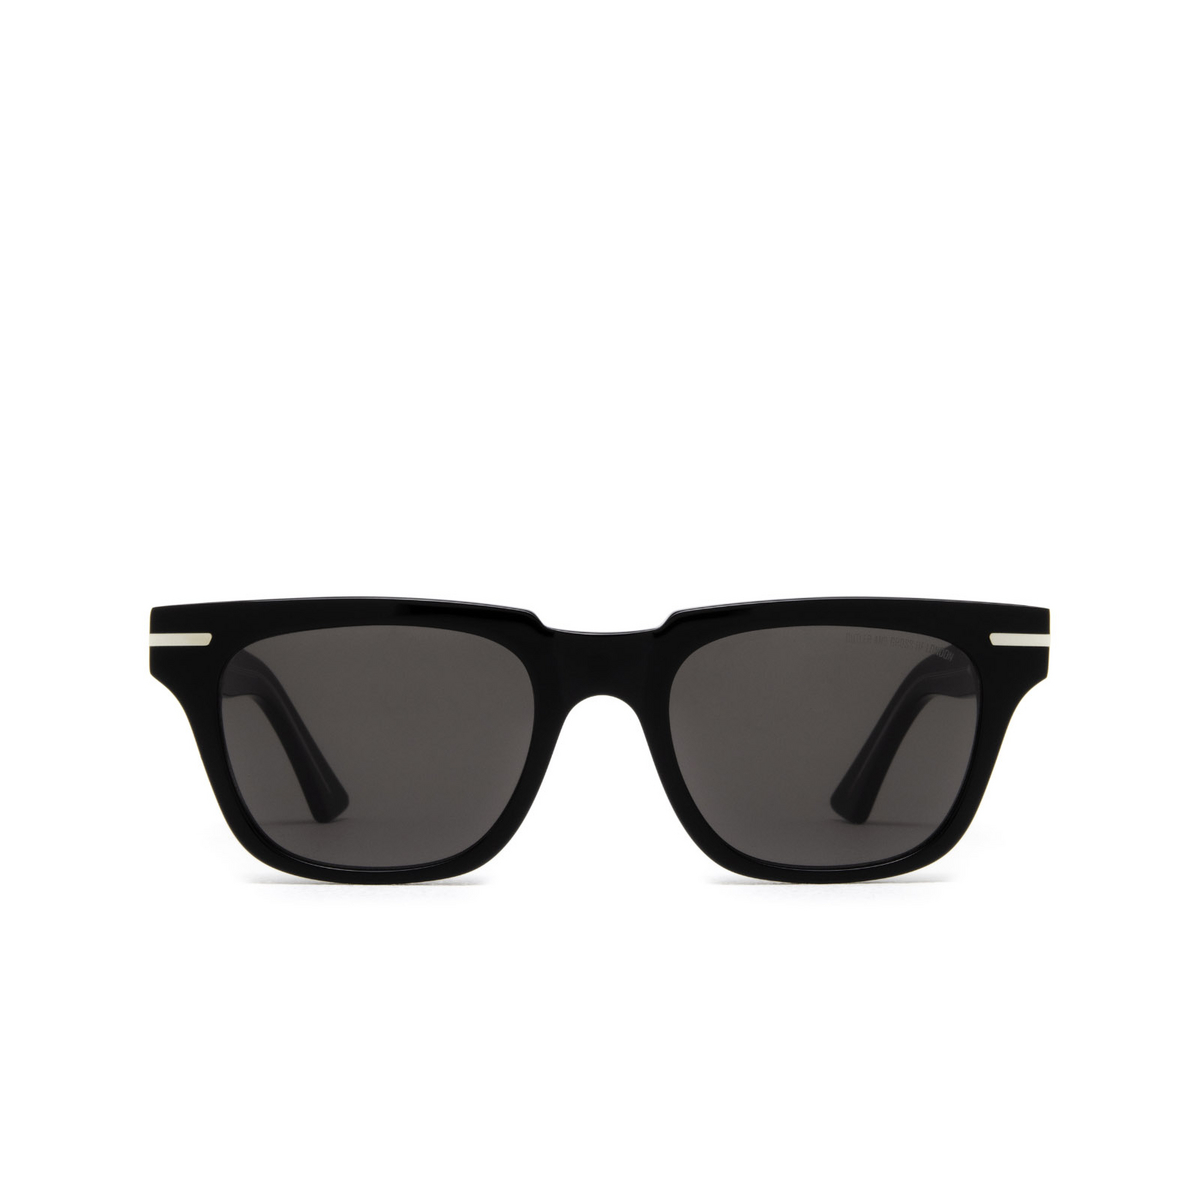 Cutler and Gross 1355 Sunglasses 05 Black Taxi - front view